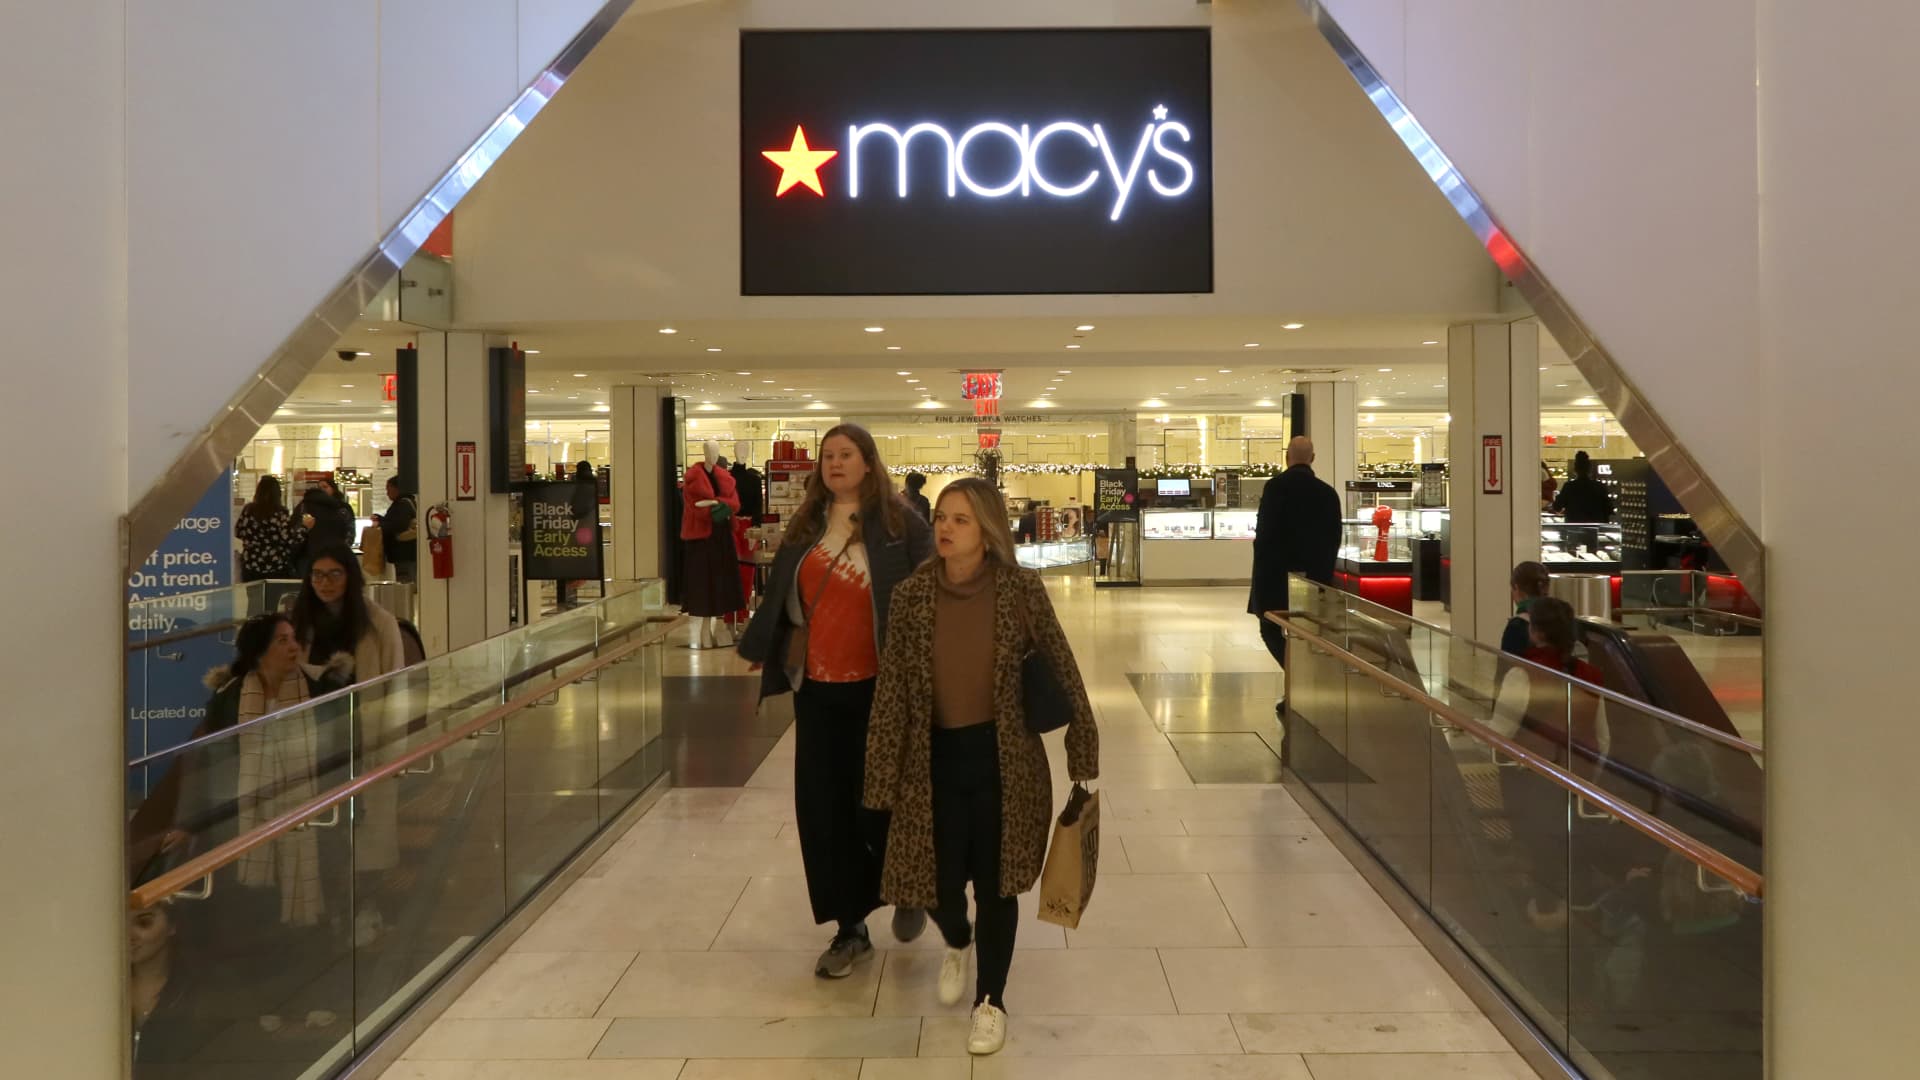 Macy's receives .8 billion buyout offer, sources say